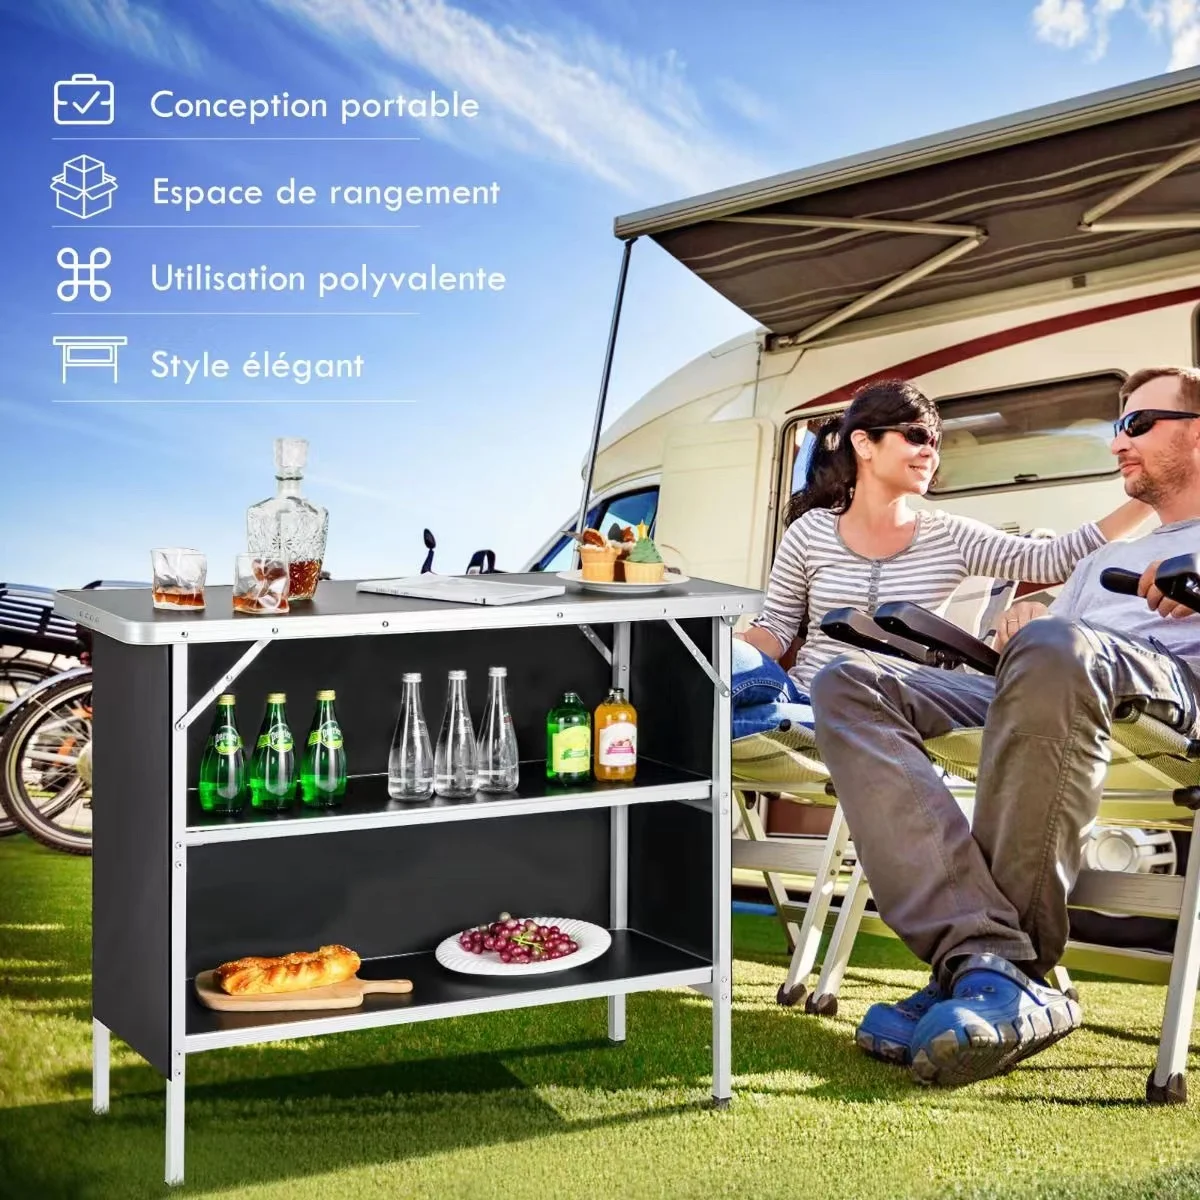 Portable Outdoor Garden Furniture Poker Banquet Catering Bbq Camping Picnic Folding Table black Rectangular Plastic Kitchen Mail